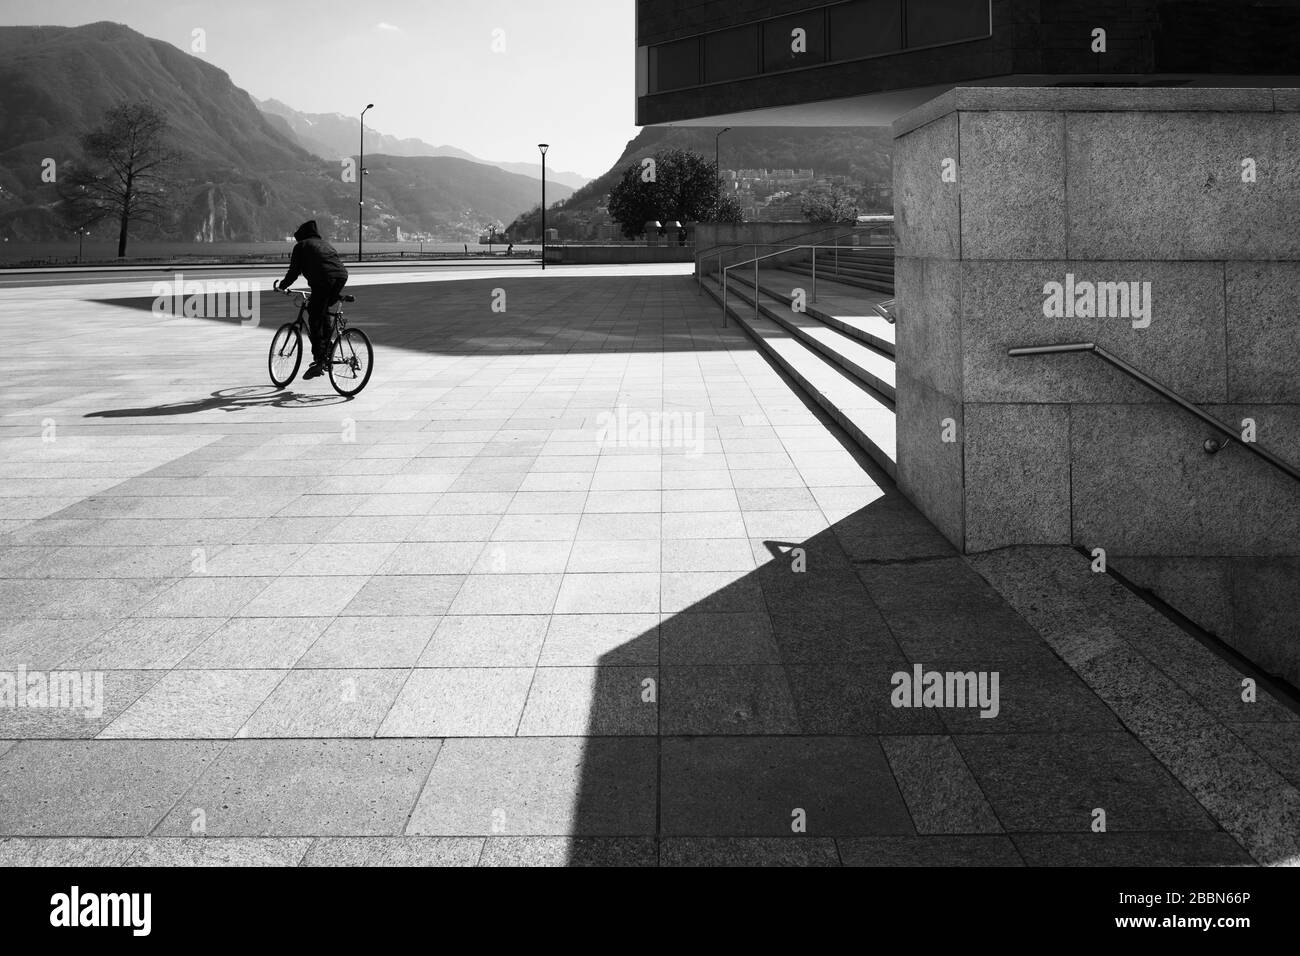 A man rides a bicycle in a large square. Black and white photos Stock Photo